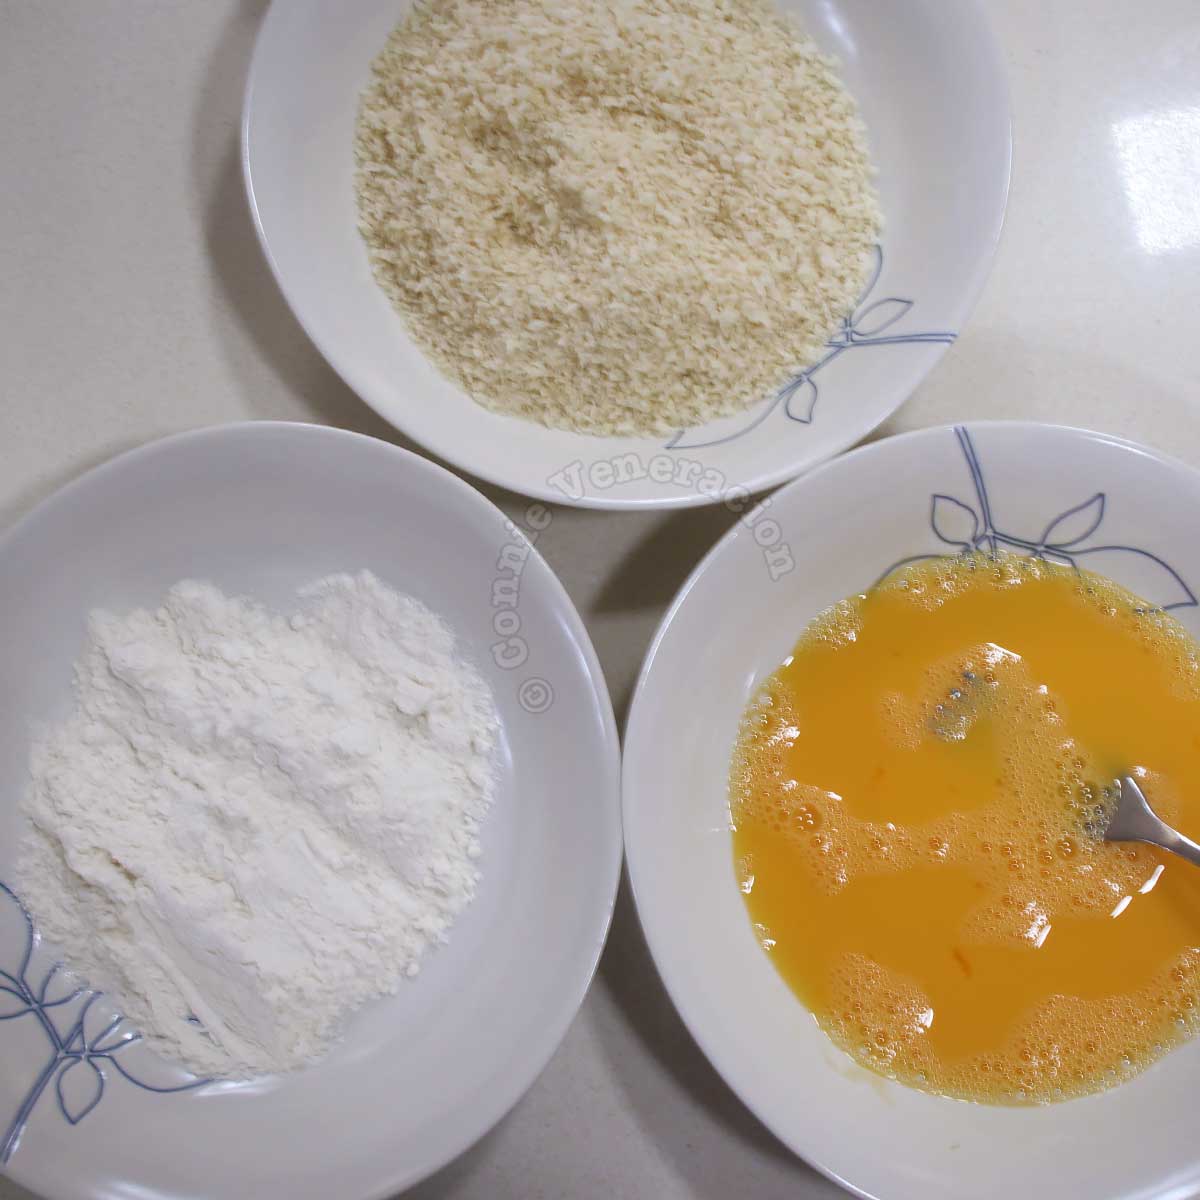 Flour, beaten egg and panko in bowls for cooking tonkatsu